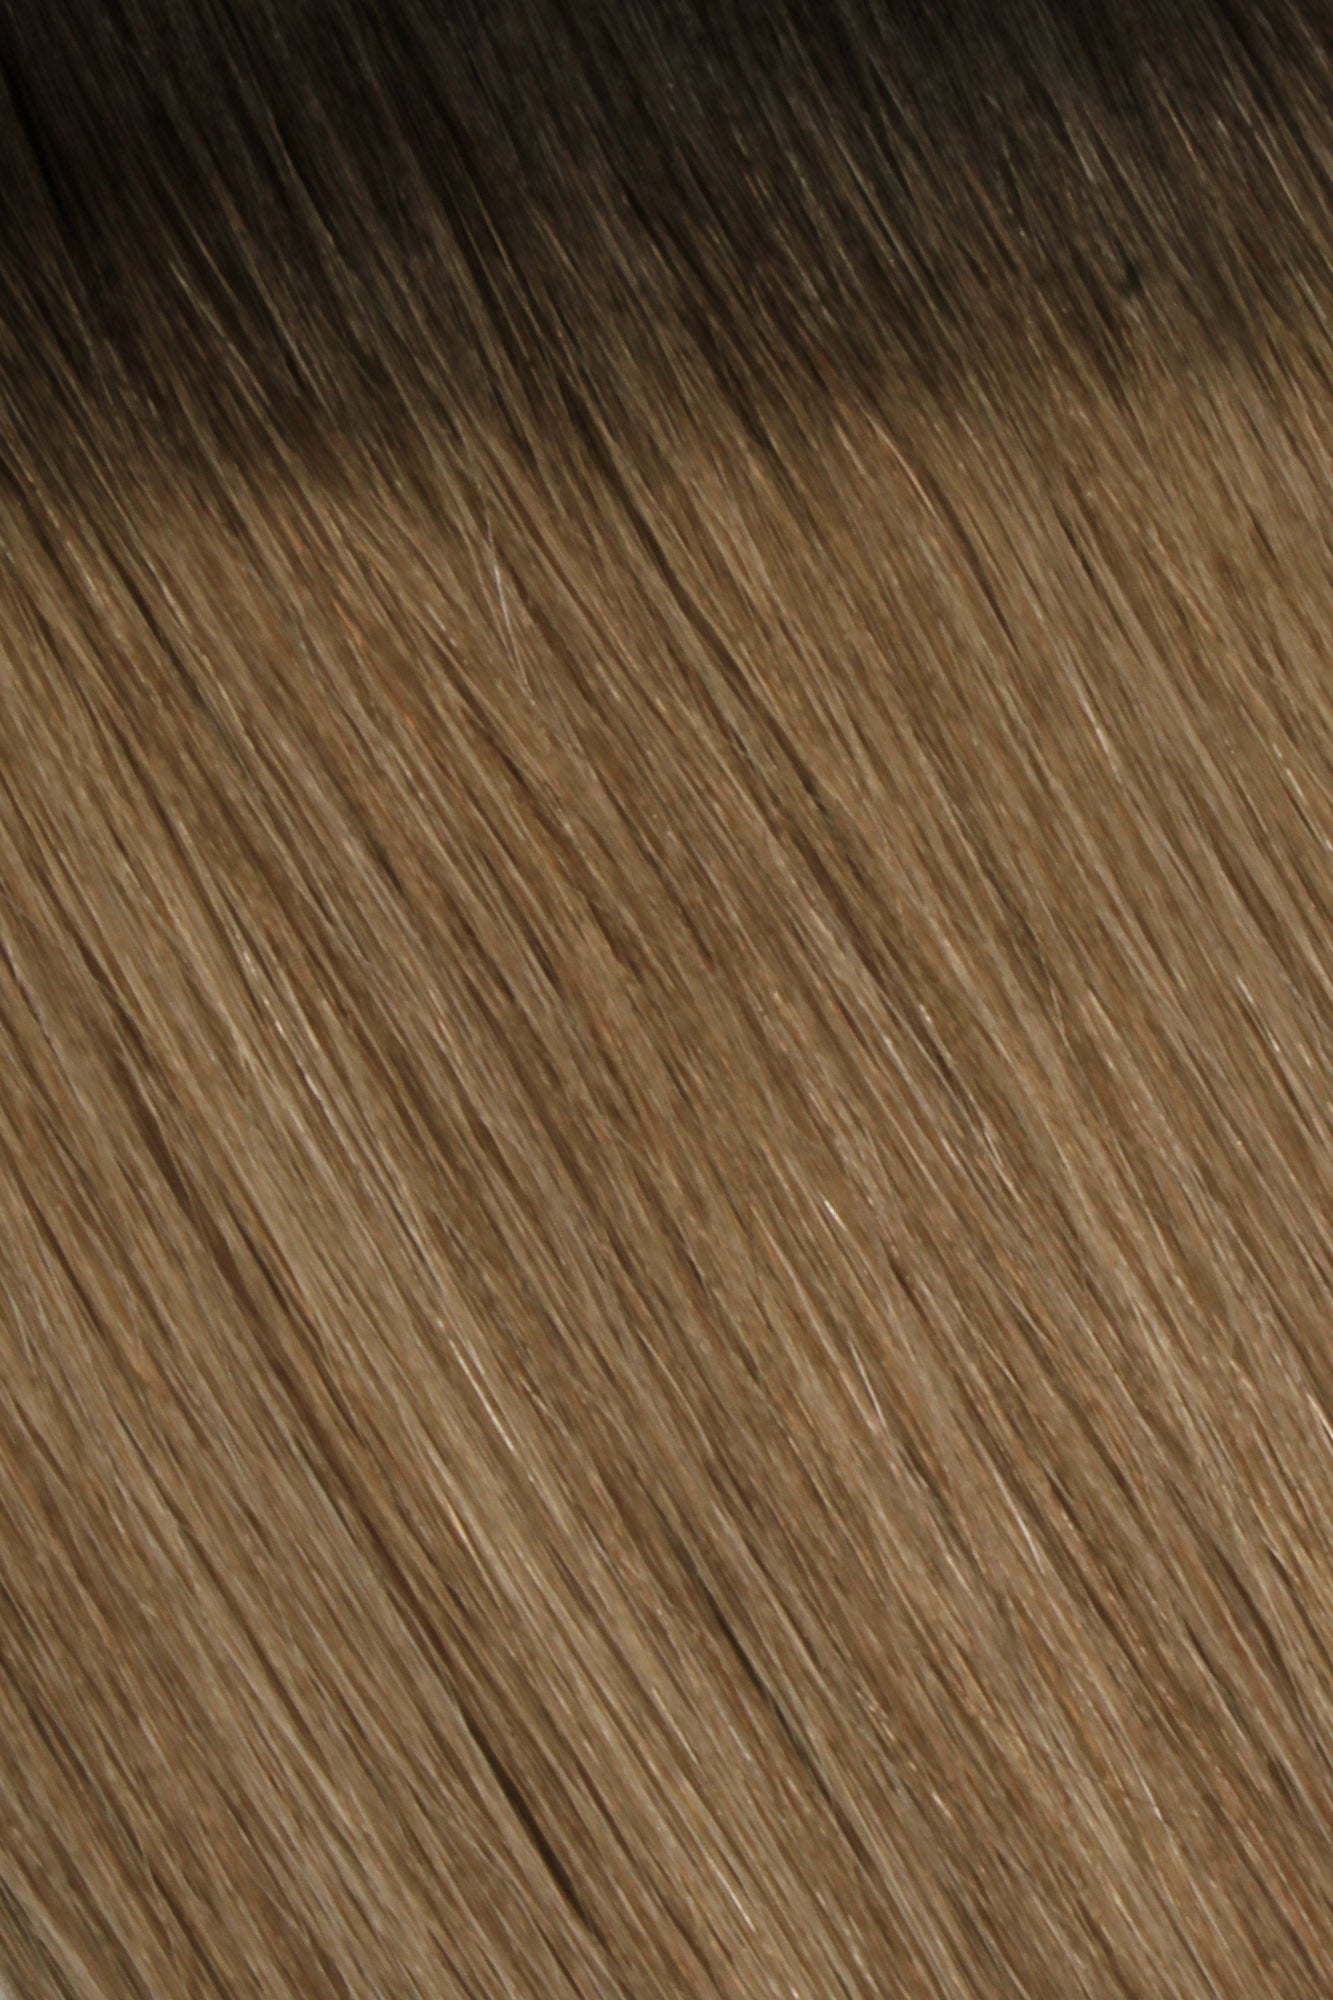 SEAMLESS® Flat Weft 24 Inches - SWAY Hair Extensions Mochaccino-Melt-R2-6-24 Natural SEAMLESS® Flat Weft 24 Inches extensions. Thin, flexible, and discreet. 100% Double Drawn Remy Human Hair. Versatile and reusable